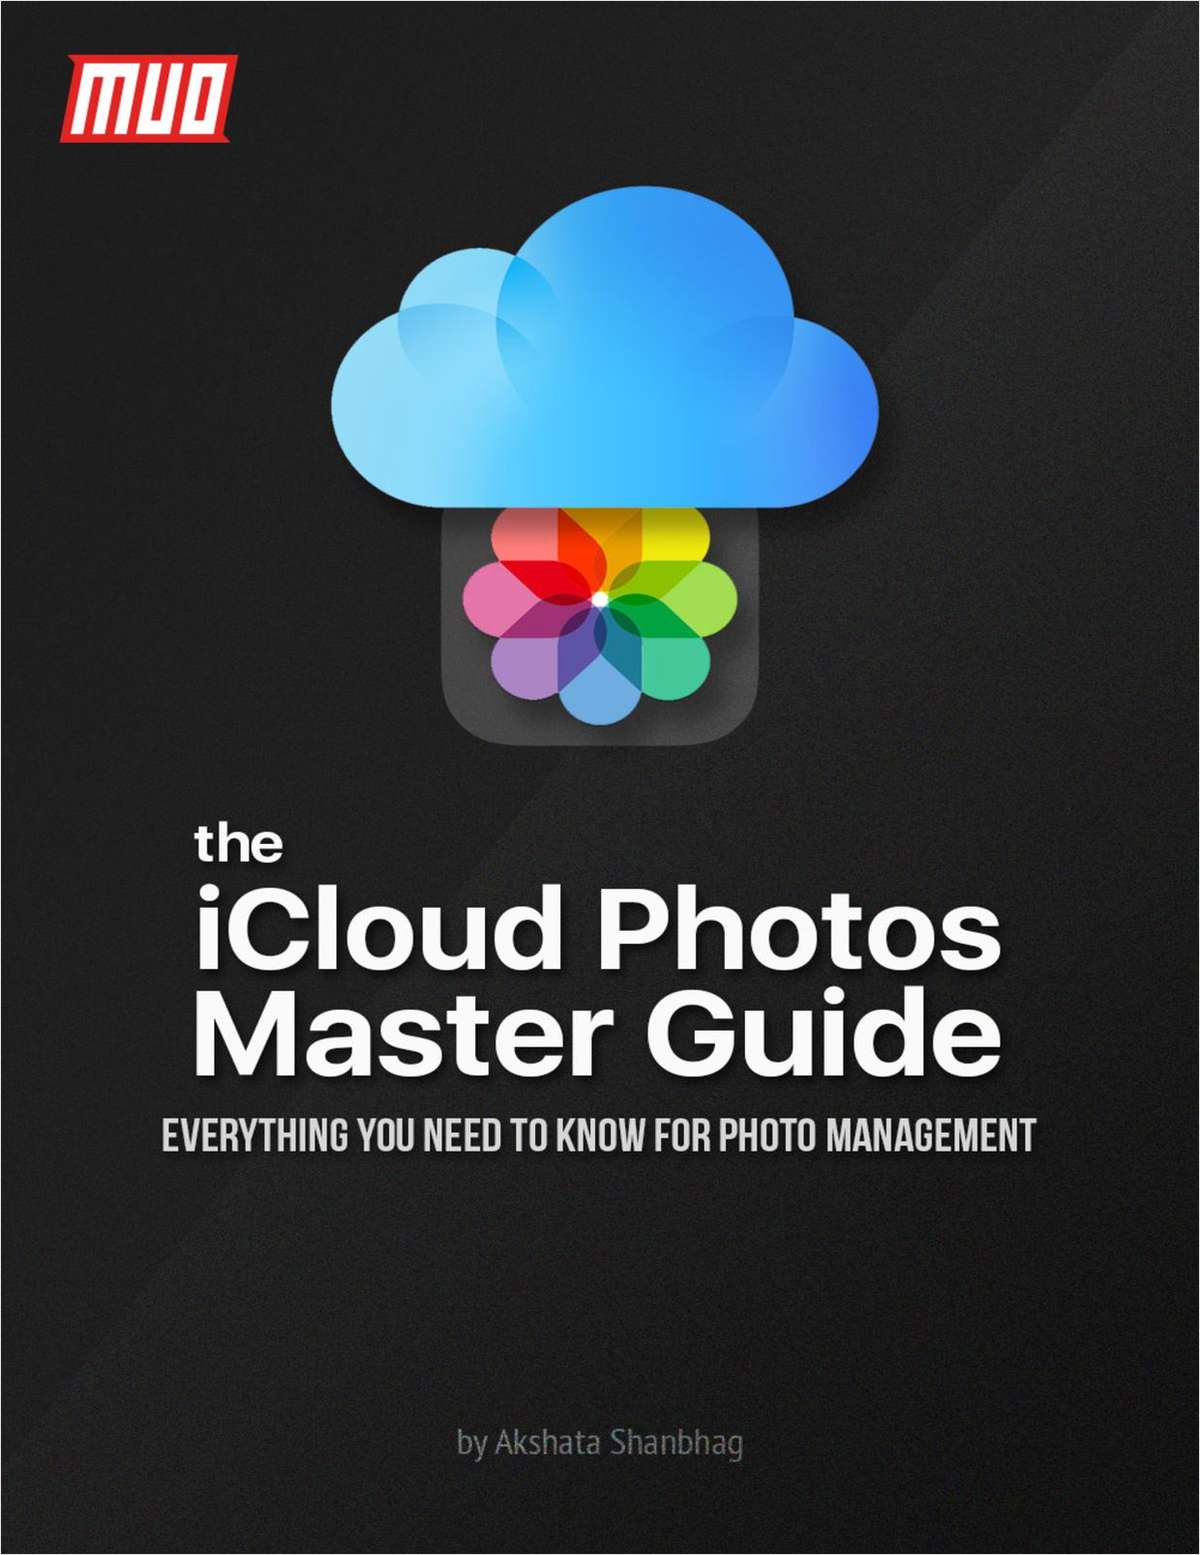 The iCloud Photos Master Guide